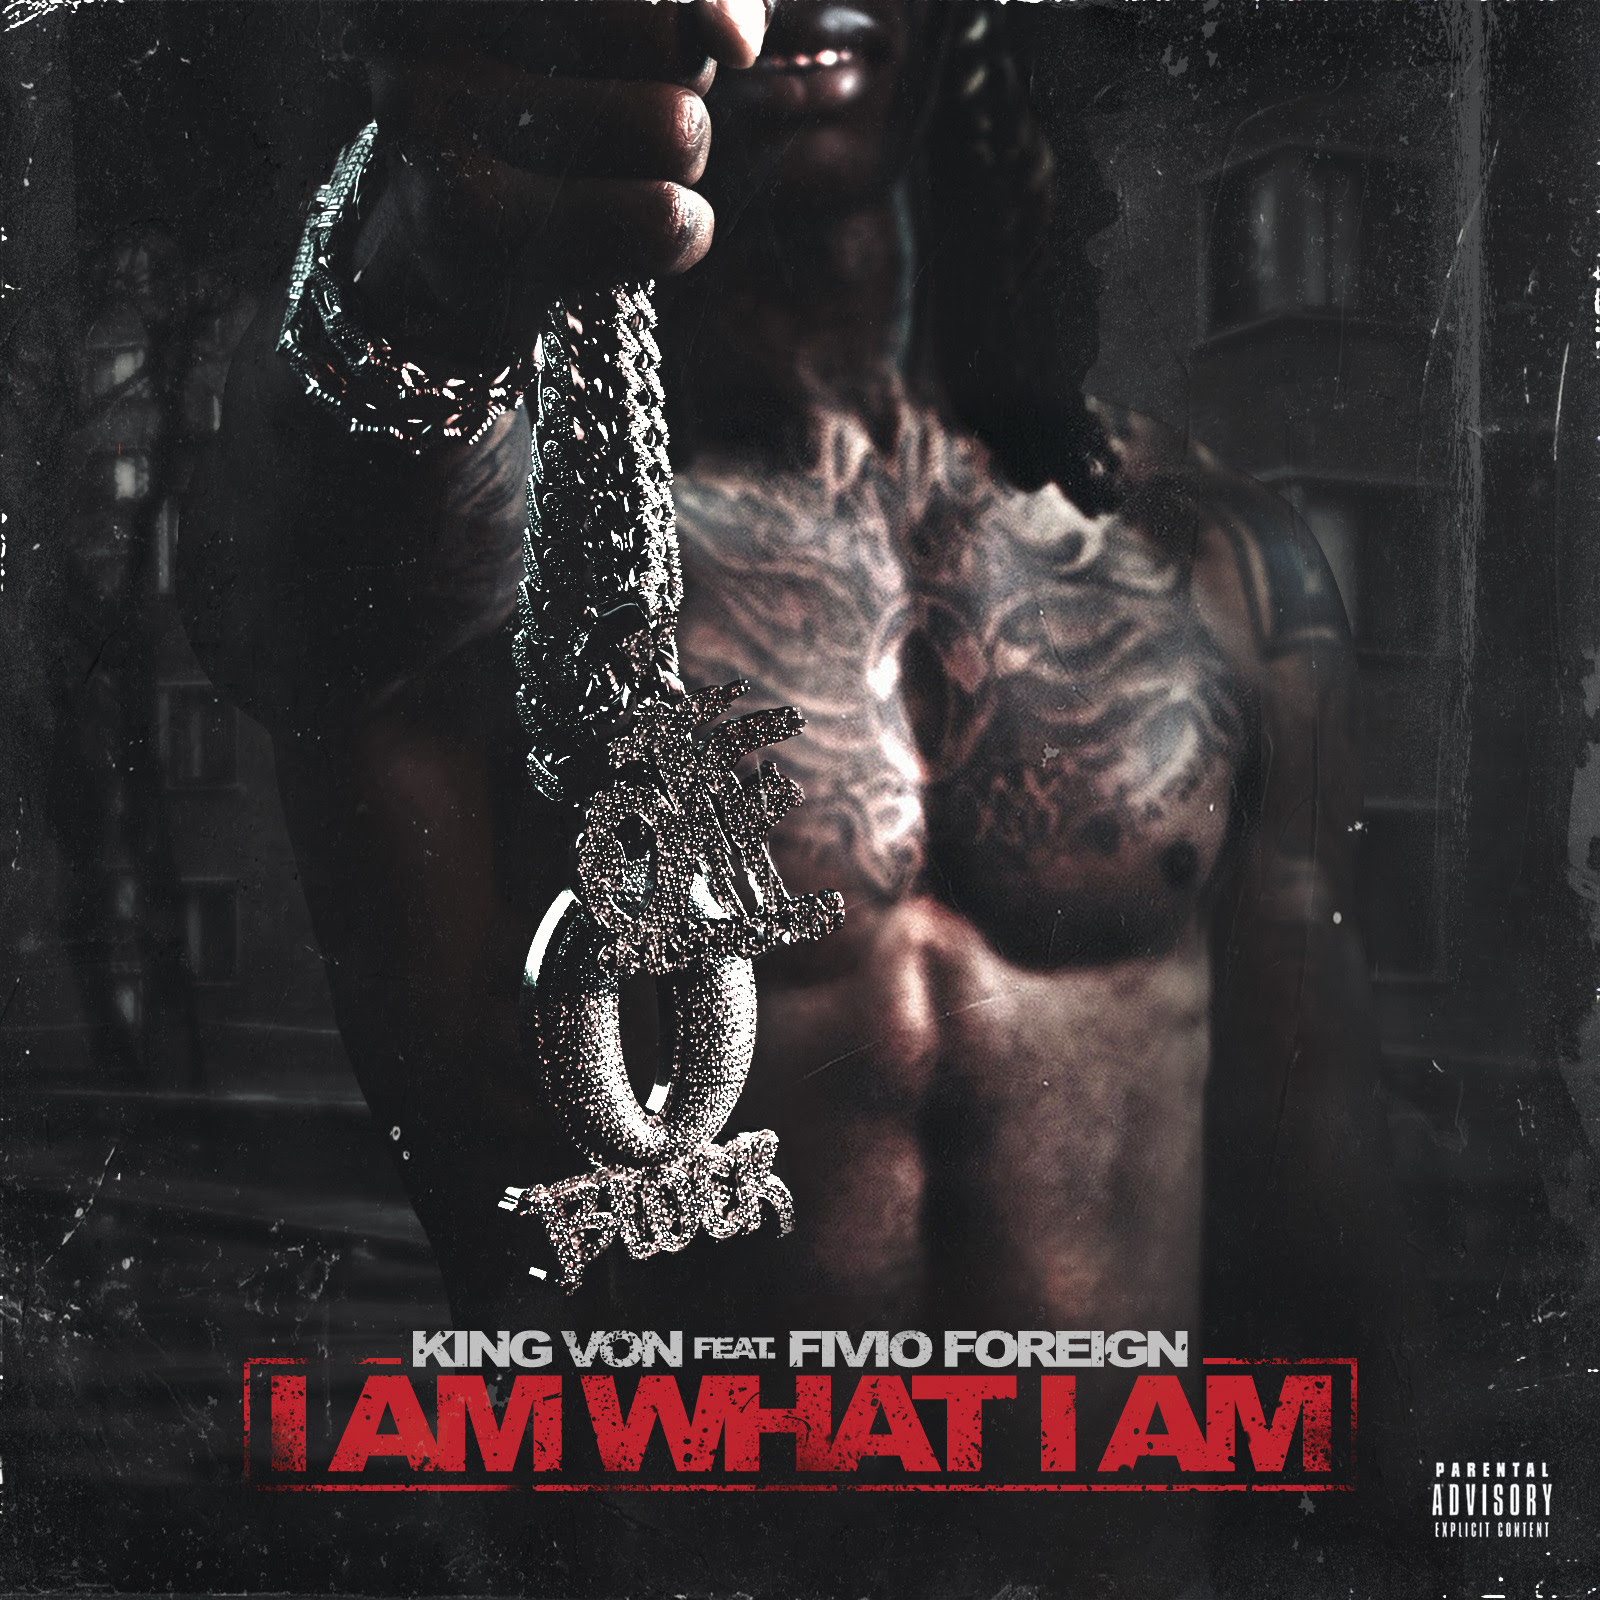 King Von Taps Fivio Foreign For The New Song “I Am What I Am”